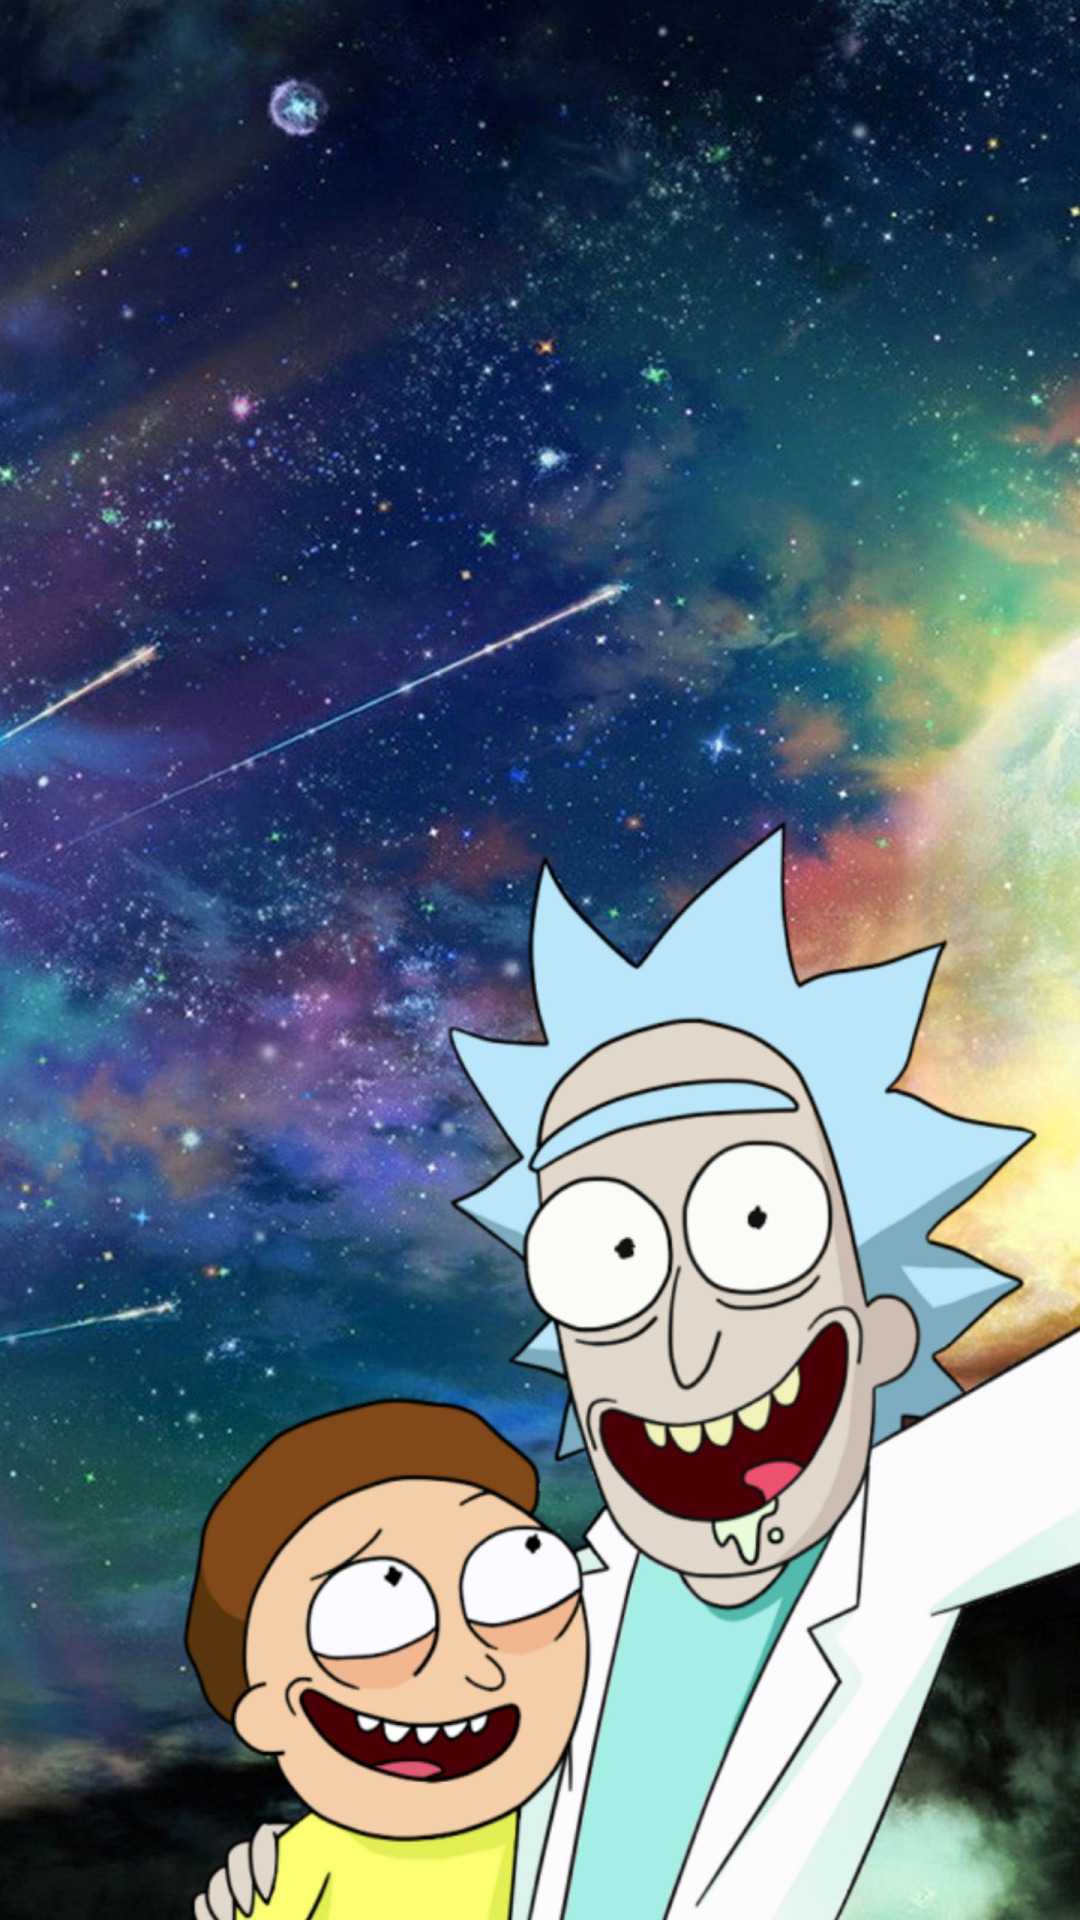 Rick And Morty Wallpaper - KoLPaPer - Awesome Free HD Wallpapers